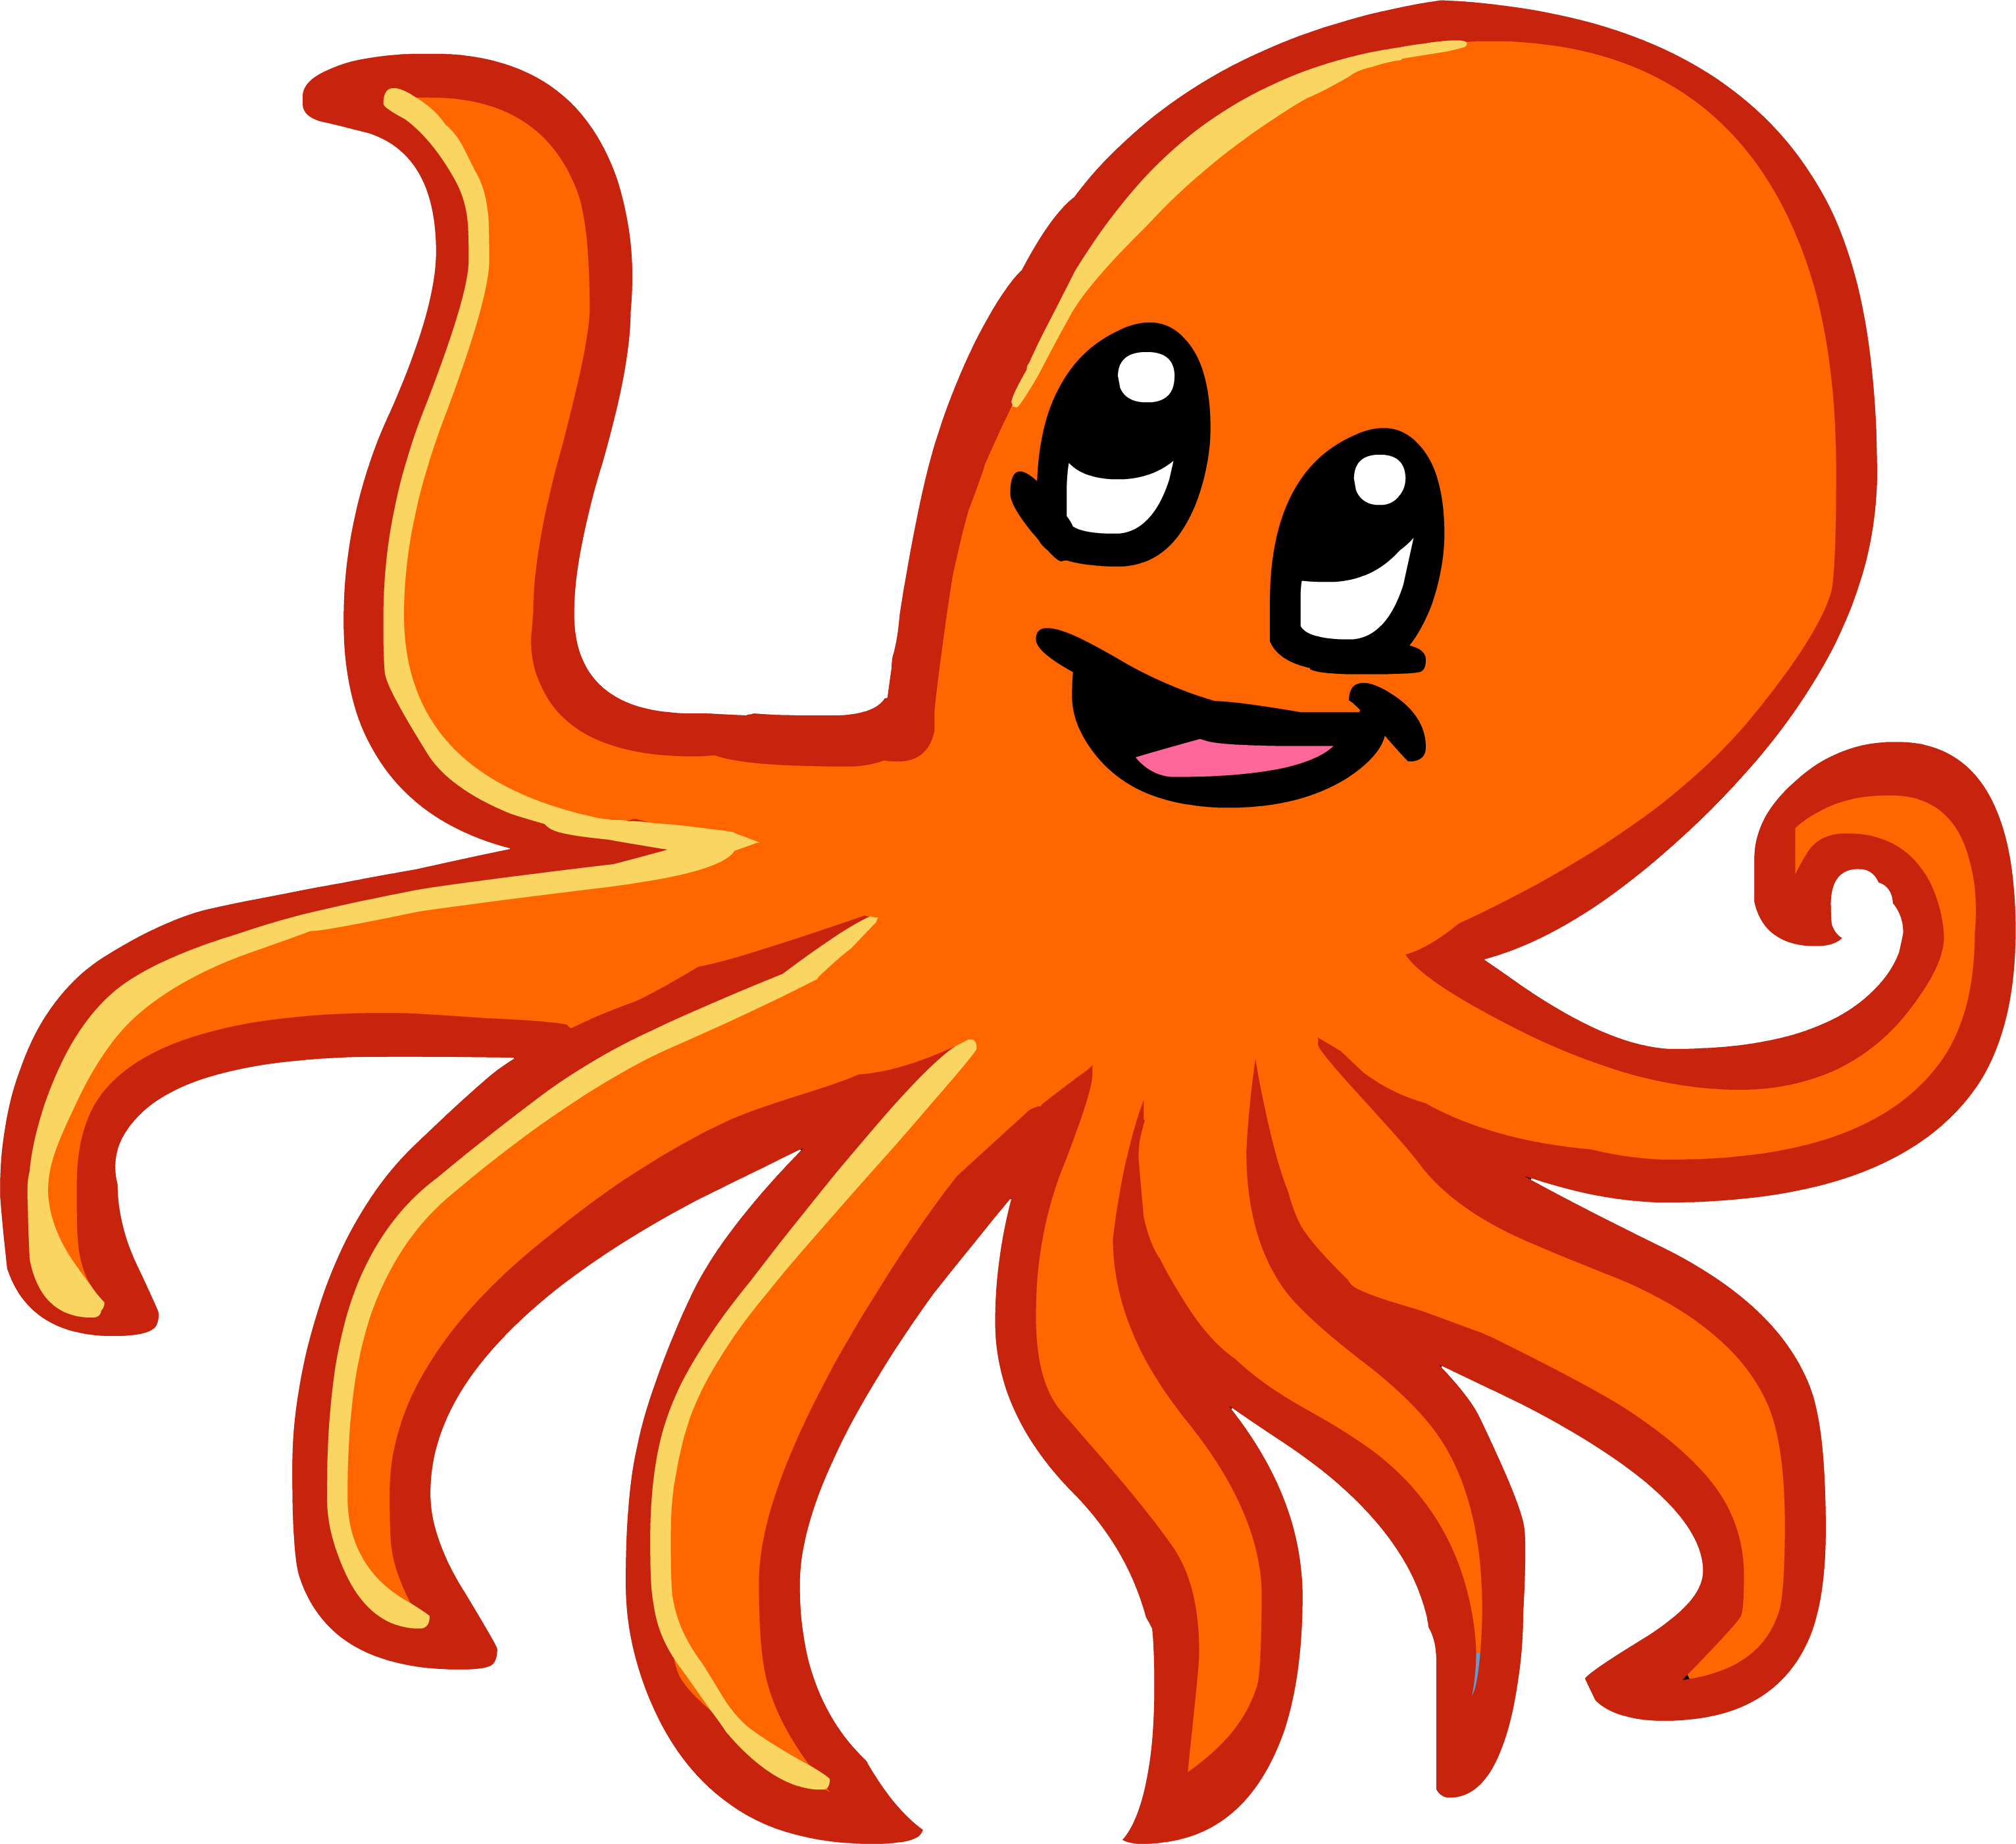 Download Orange Octopus Cartoon PNG Image with No Background 